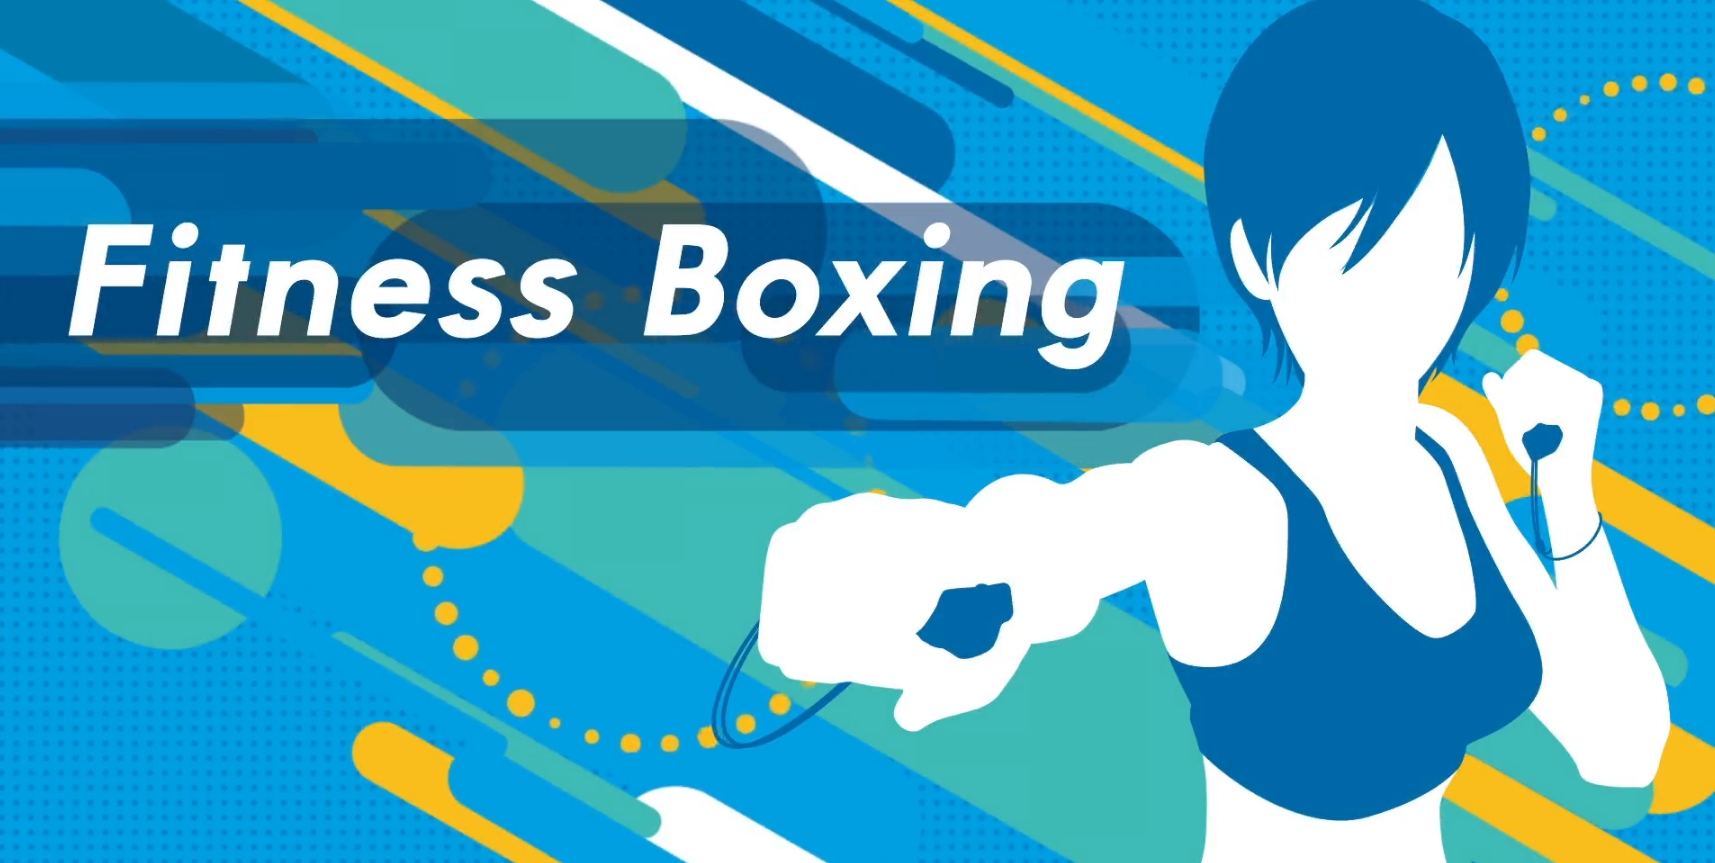 Nintendo Switch’s Fitness Boxing Has Sold Over One Million Units Worldwide